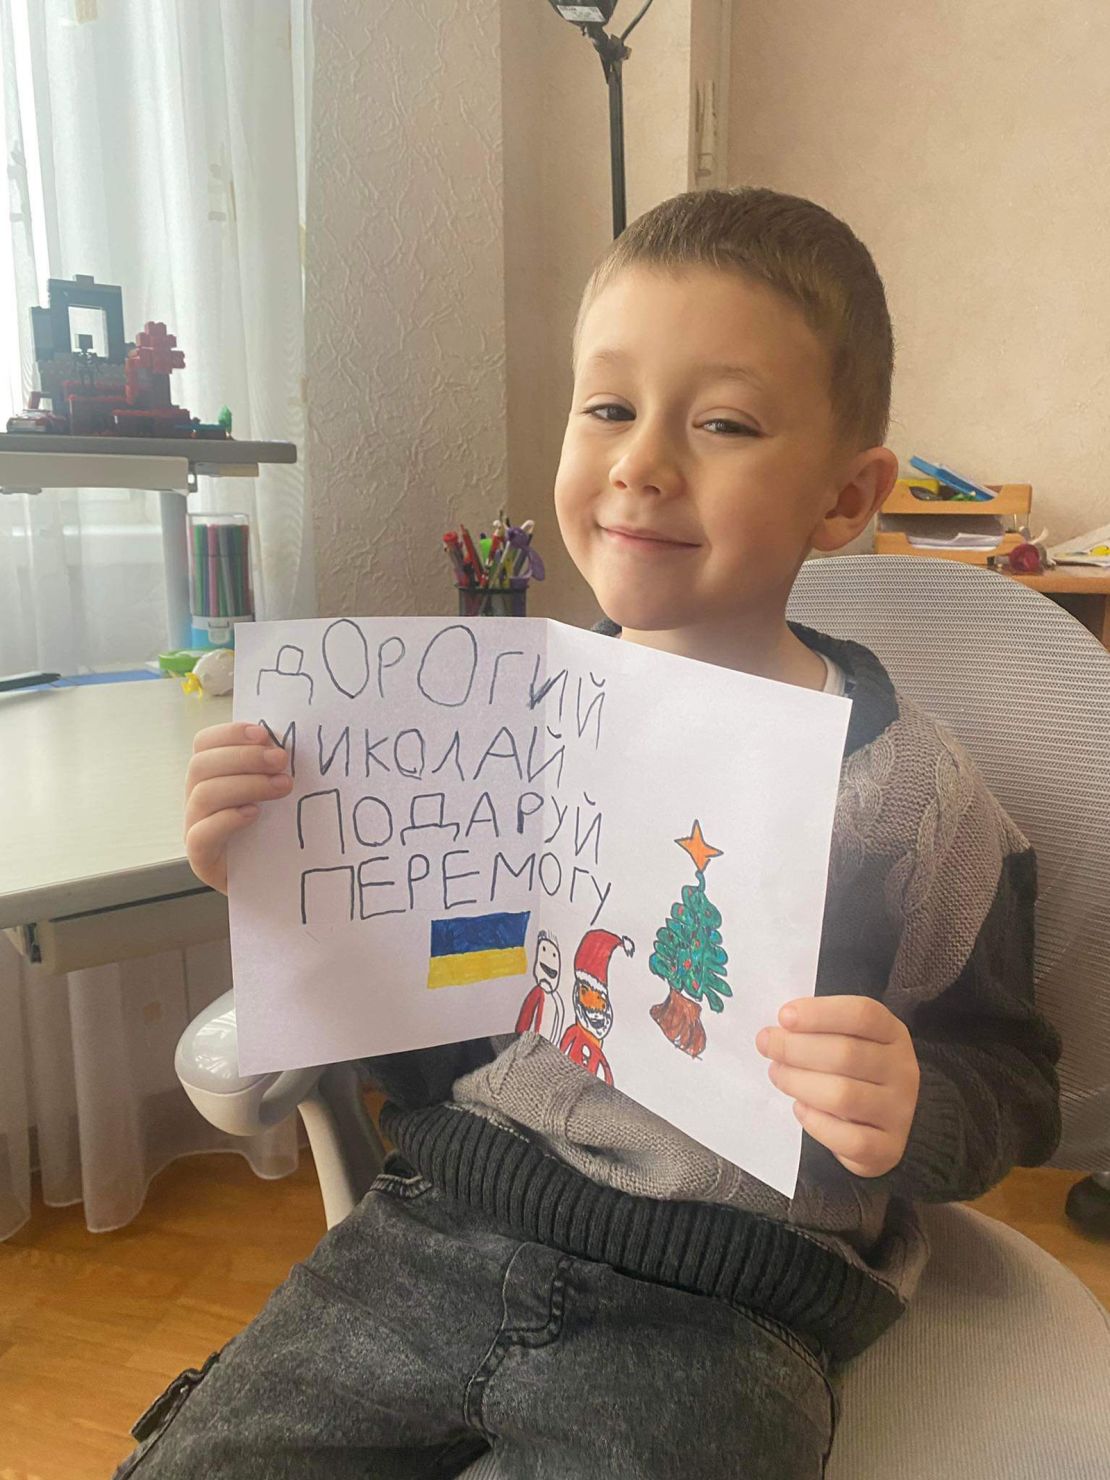 Maks, 5 years old. Five year old Maks wants victory for Christmas. His letter is simple and short: "Dear Nicholas, bring us victory" His mother says Maks picked up his strong patriotism and the importance of Ukraine's victory from overhearing adult conversations. The family left Kyiv when the war started for western Ukraine. He left his letter for St Nicholas on the window sill of their temporary new home.